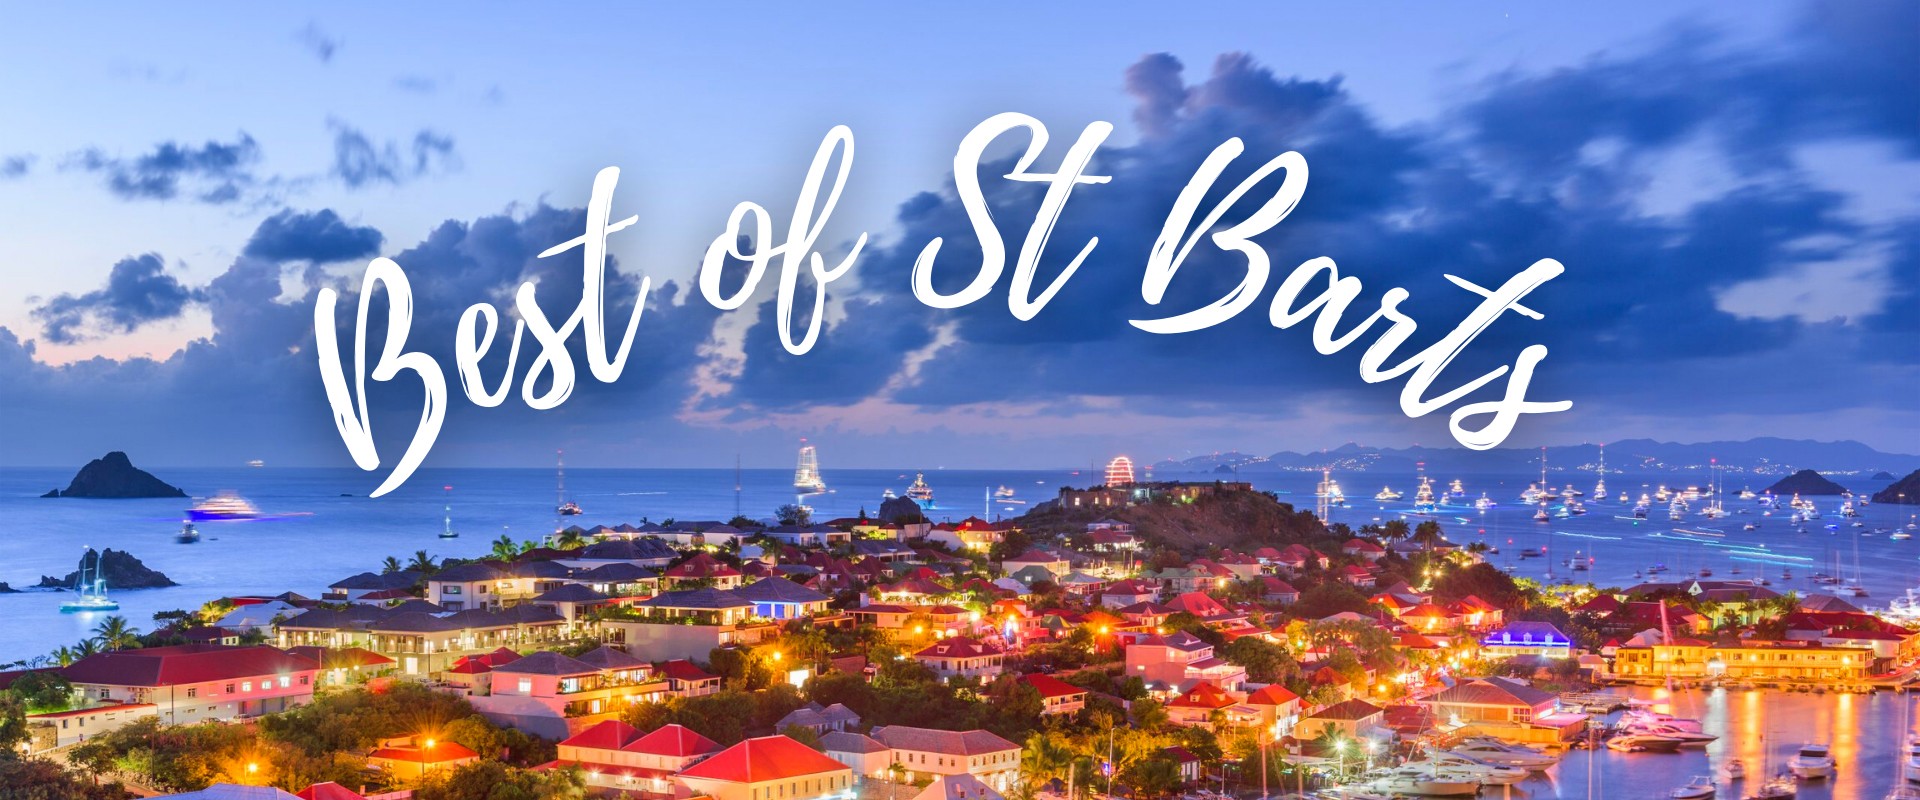 Best of St Barts Guide